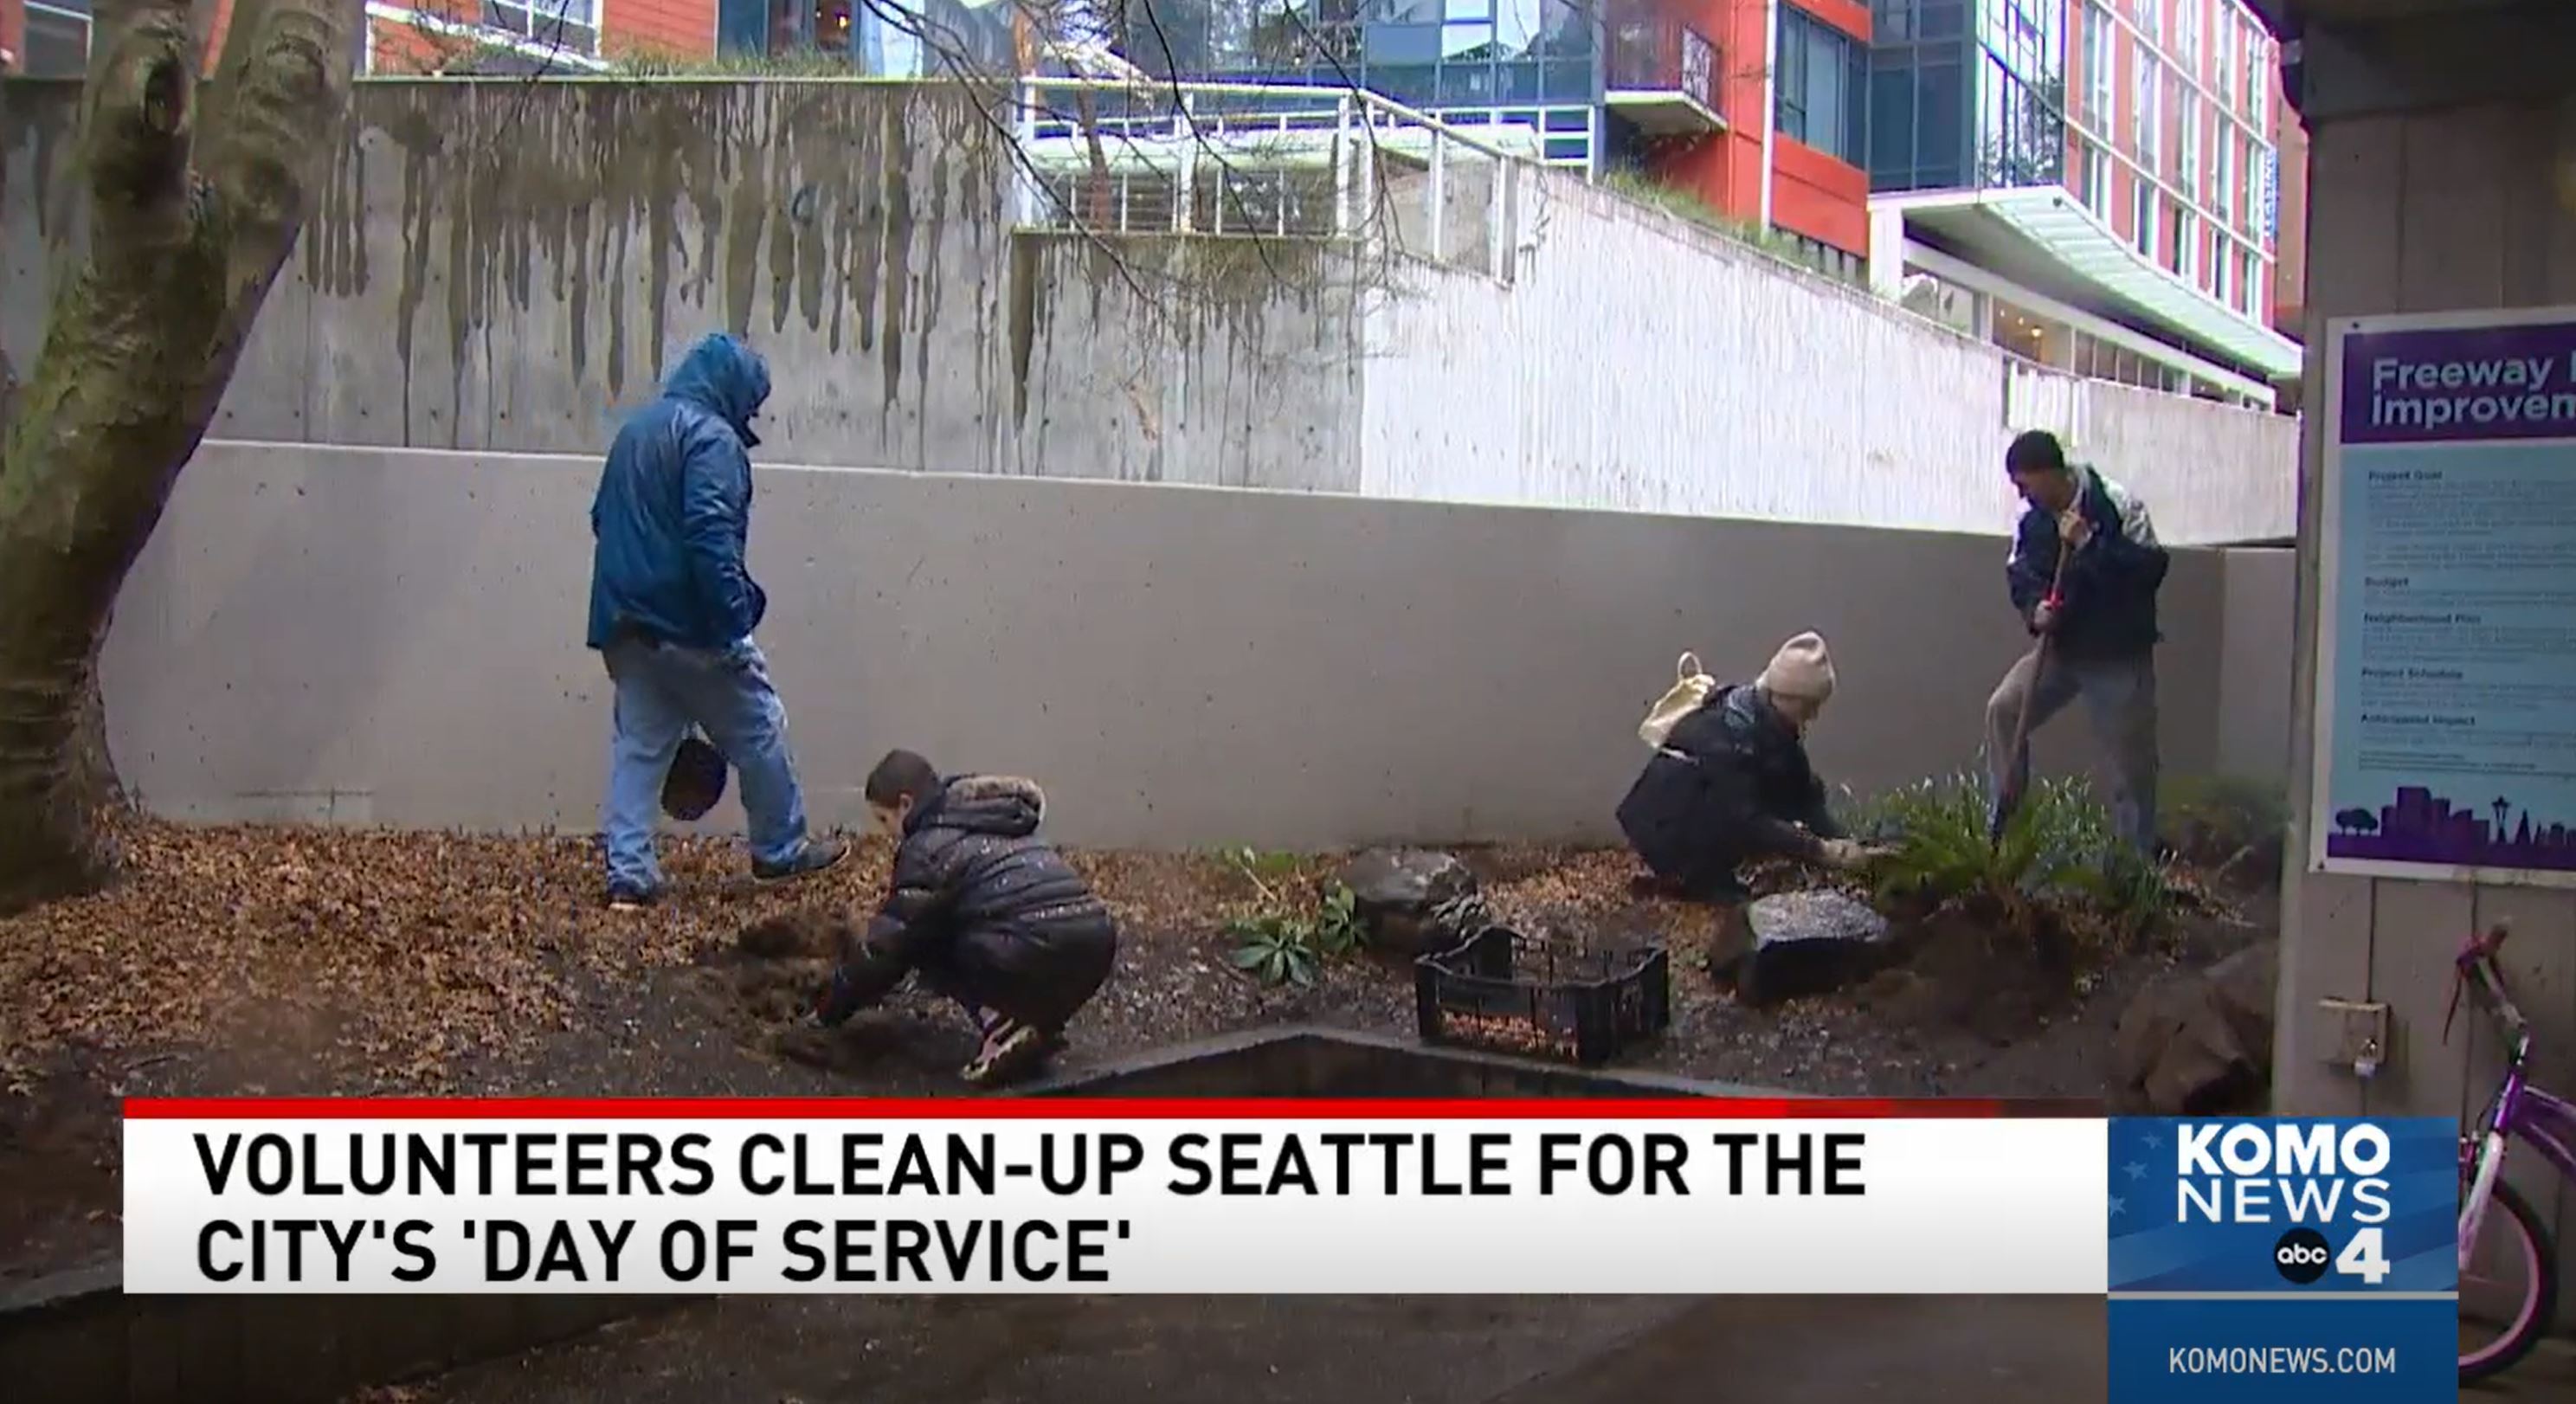 Day of Service Featured on KOMO